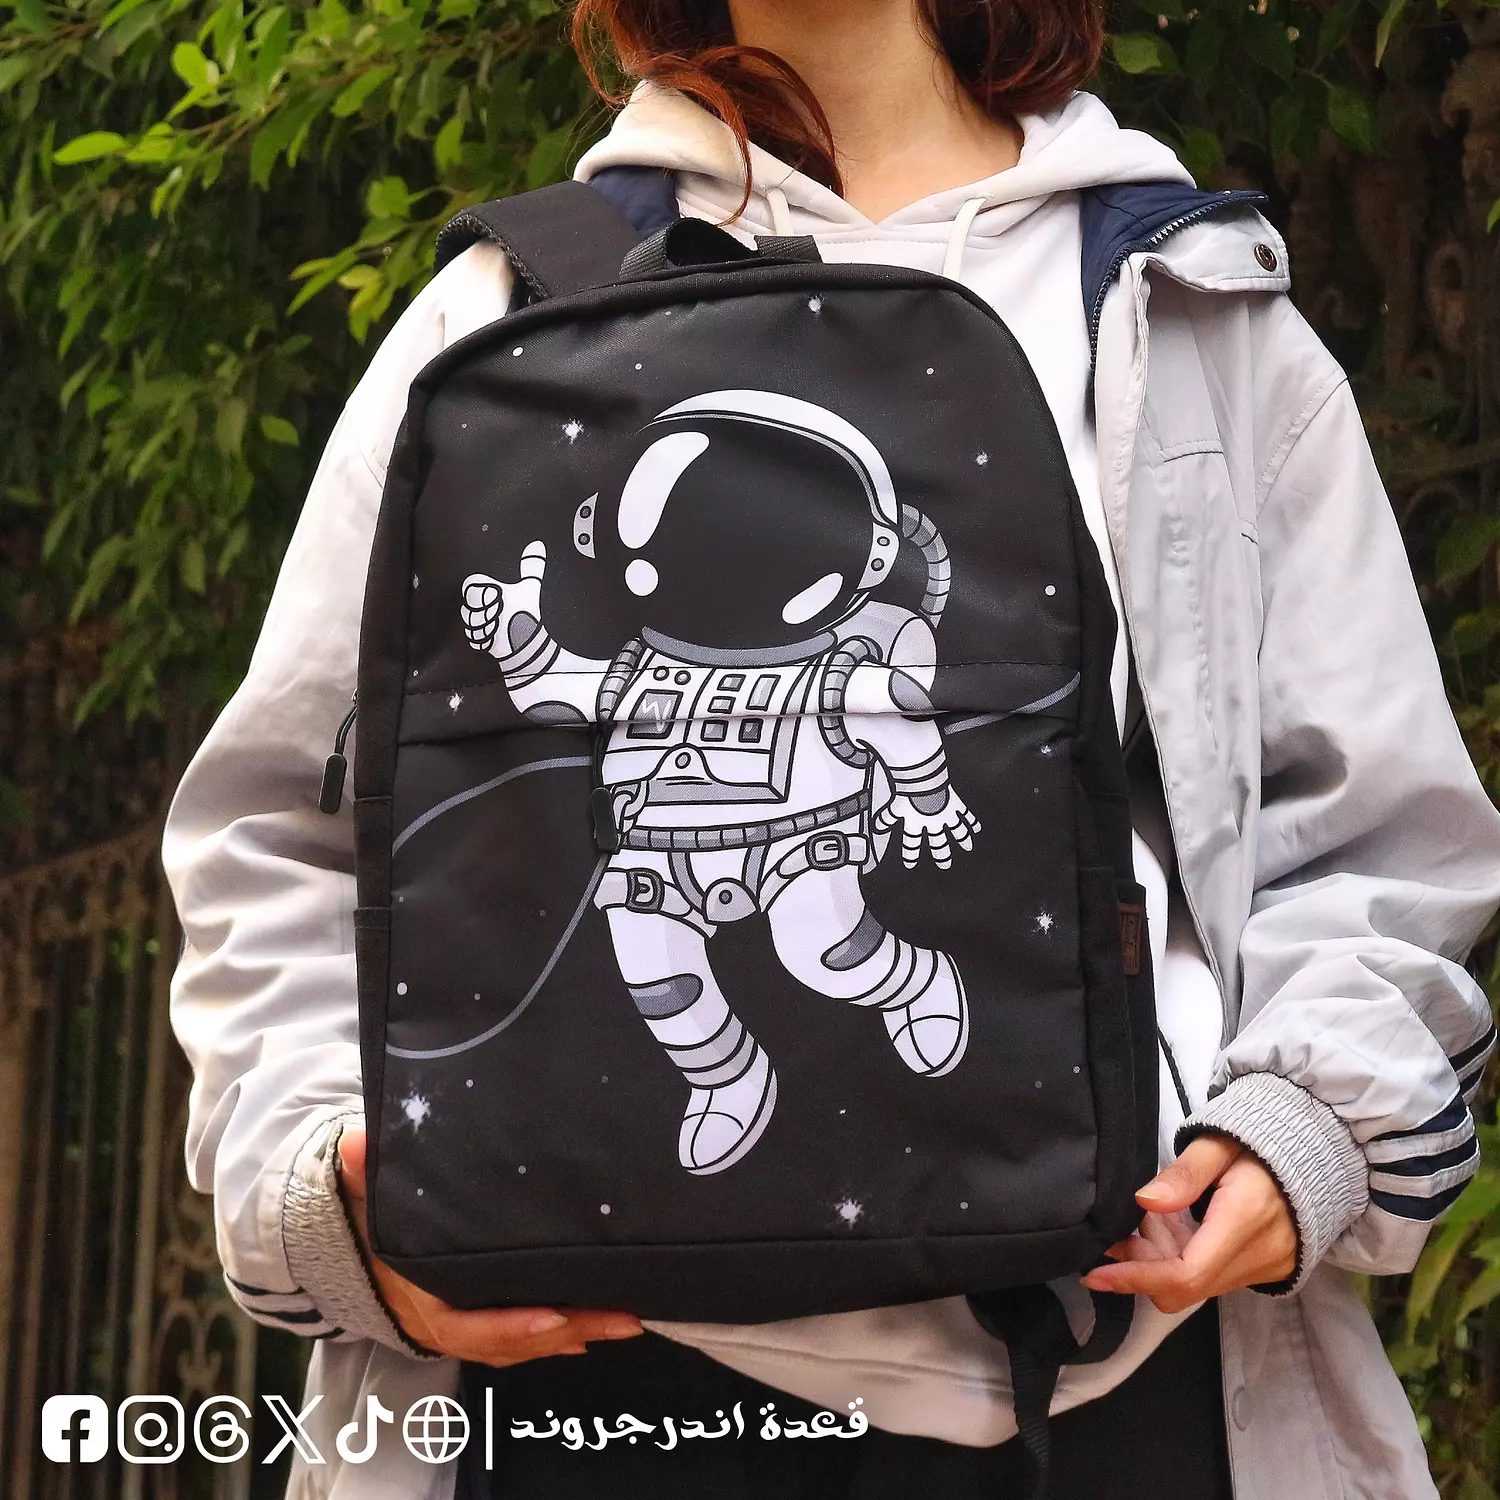 Astronaut Like 👍🏻 Backpack 🎒  hover image